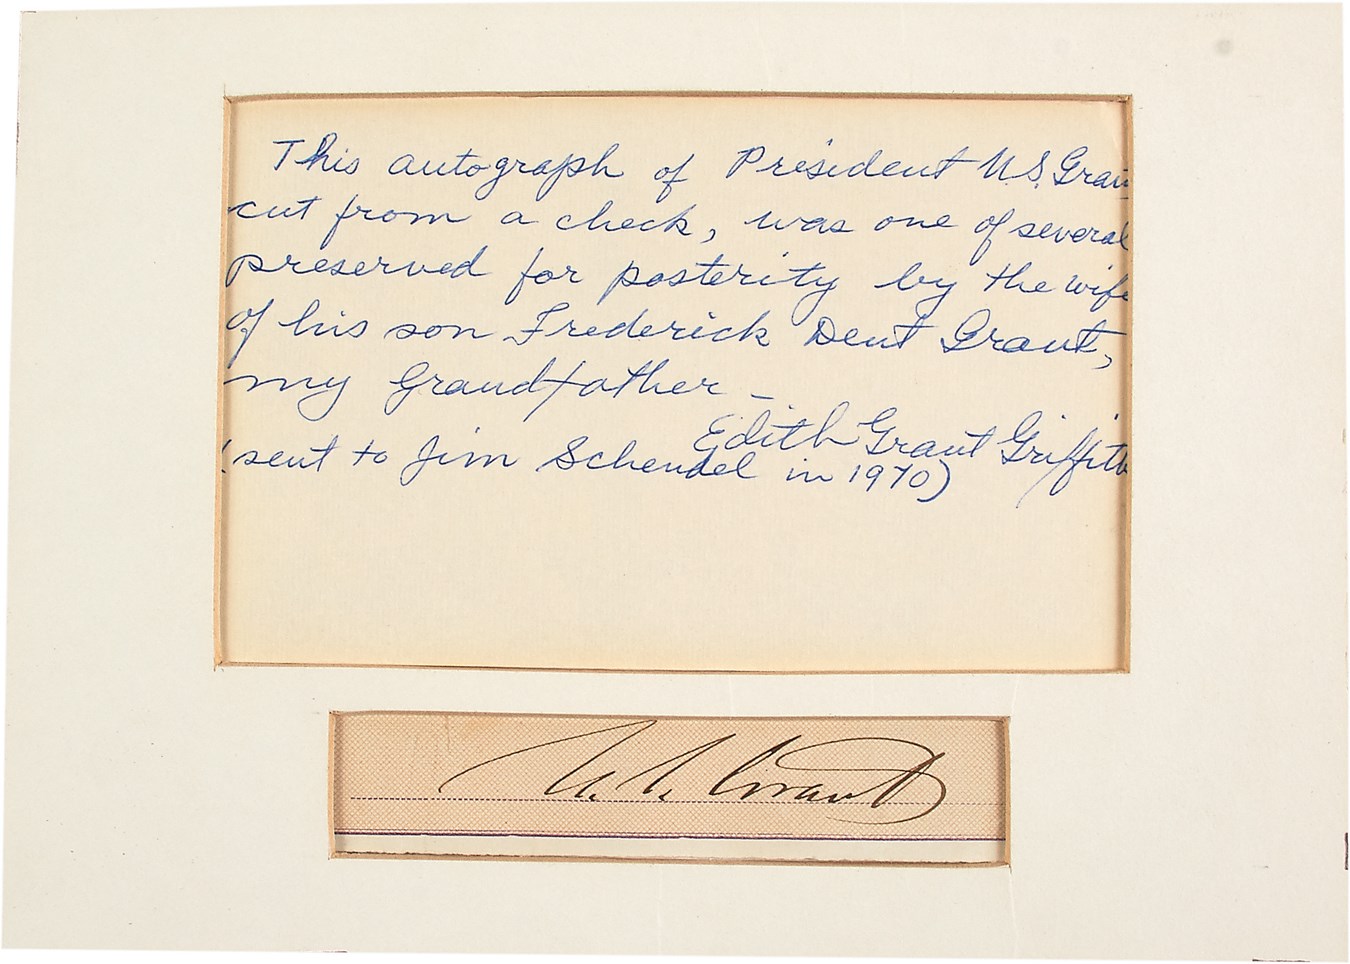 Jim Schendel Autograph Collection - Ulysses S. Grant Autograph Gifted by Grant's Granddaughter (PSA)